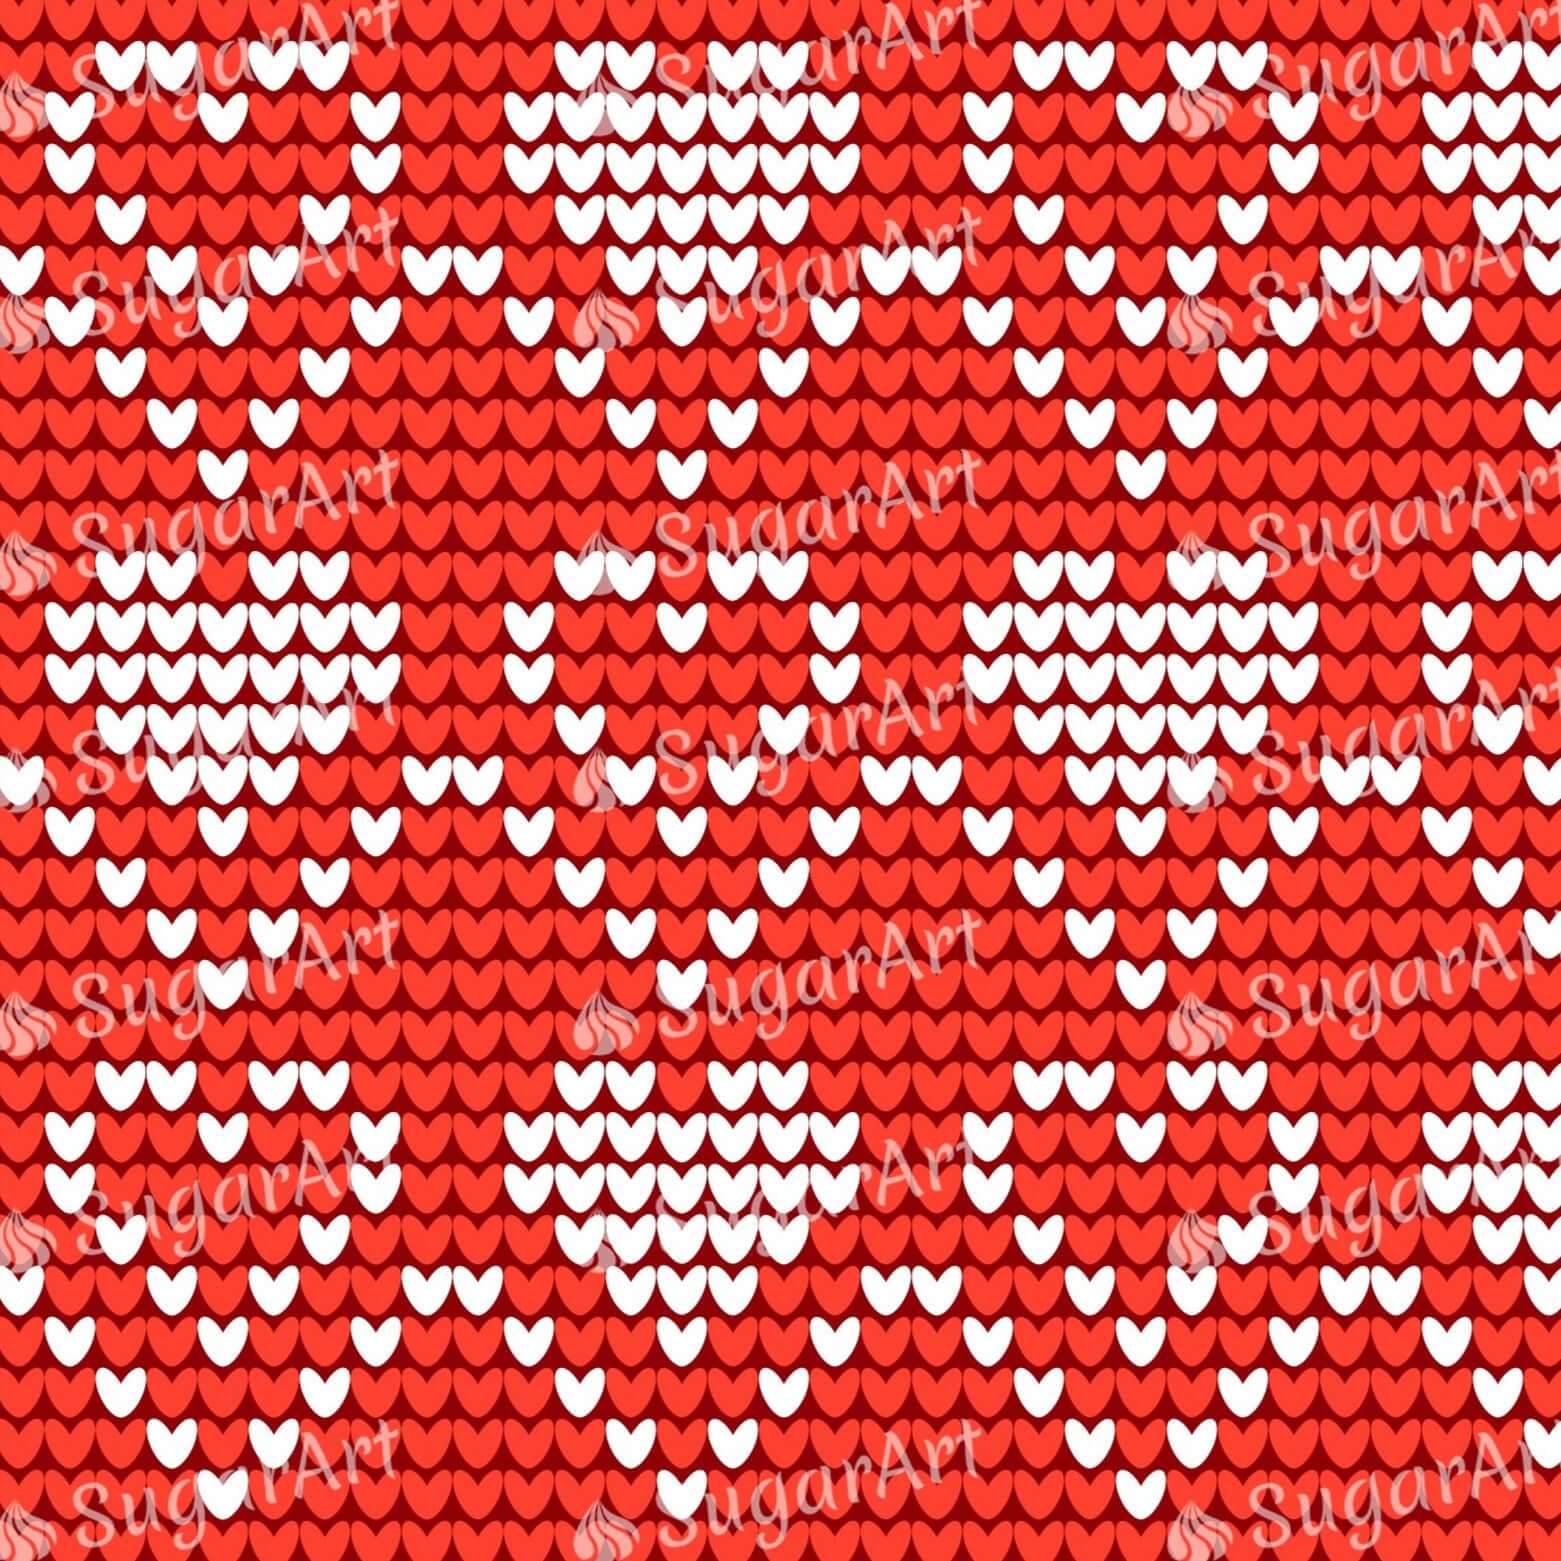 Knitted Hearts for Valentines Day - Icing - ISA217.